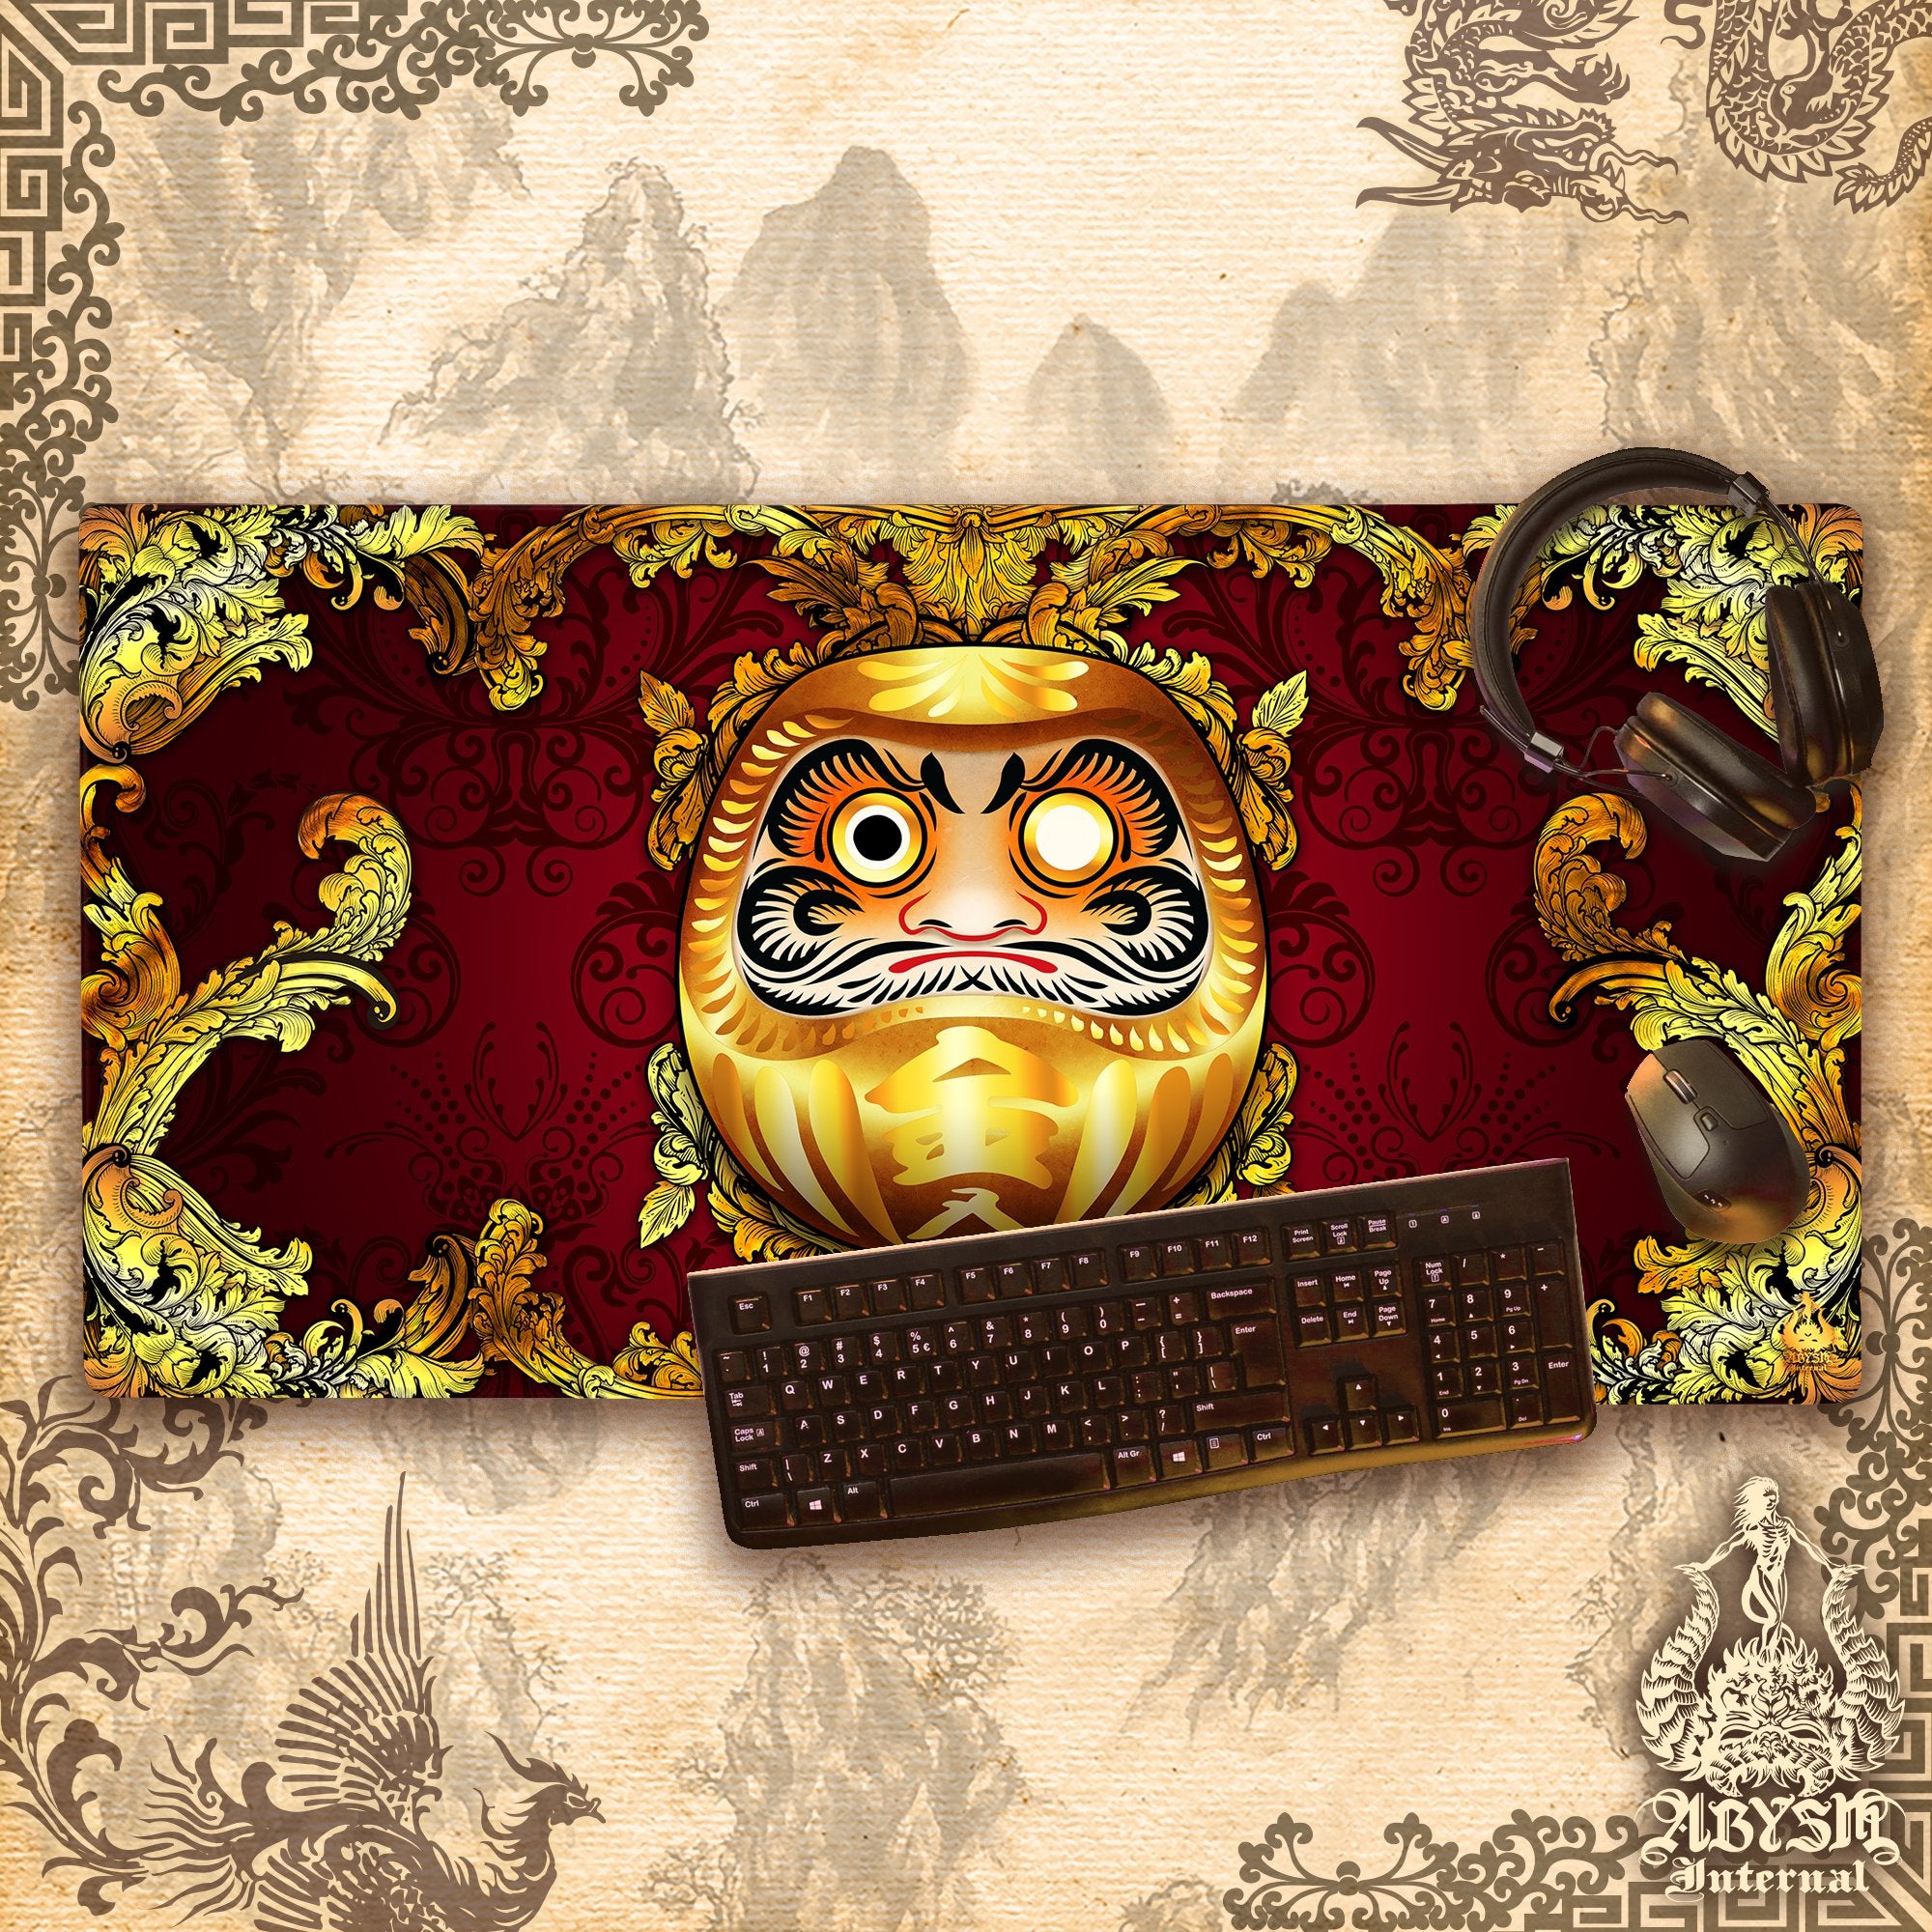 Mouse Pad, Daruma Gaming Desk Mat, Japanese Workpad, Red and Gold Table Protector Cover, Art Print - 3 Colors - Abysm Internal